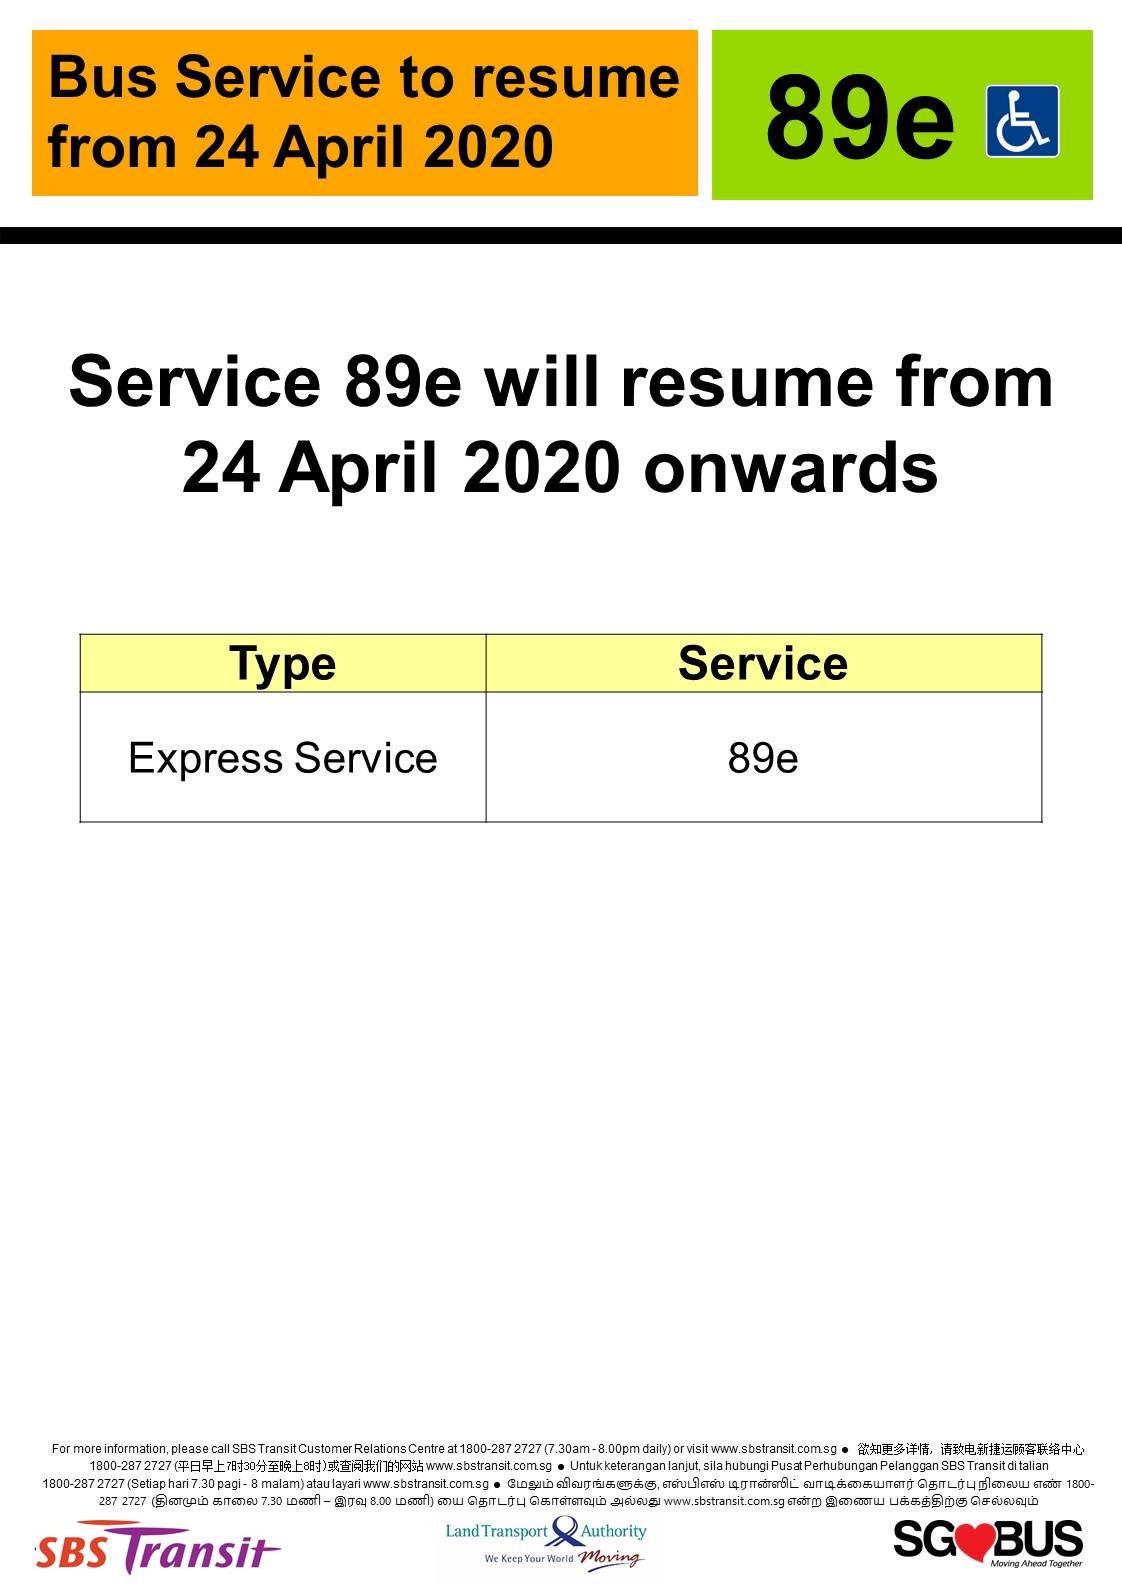 Official announcement from SBS Transit on resumption of express bus service 89e from 24 April 2020.